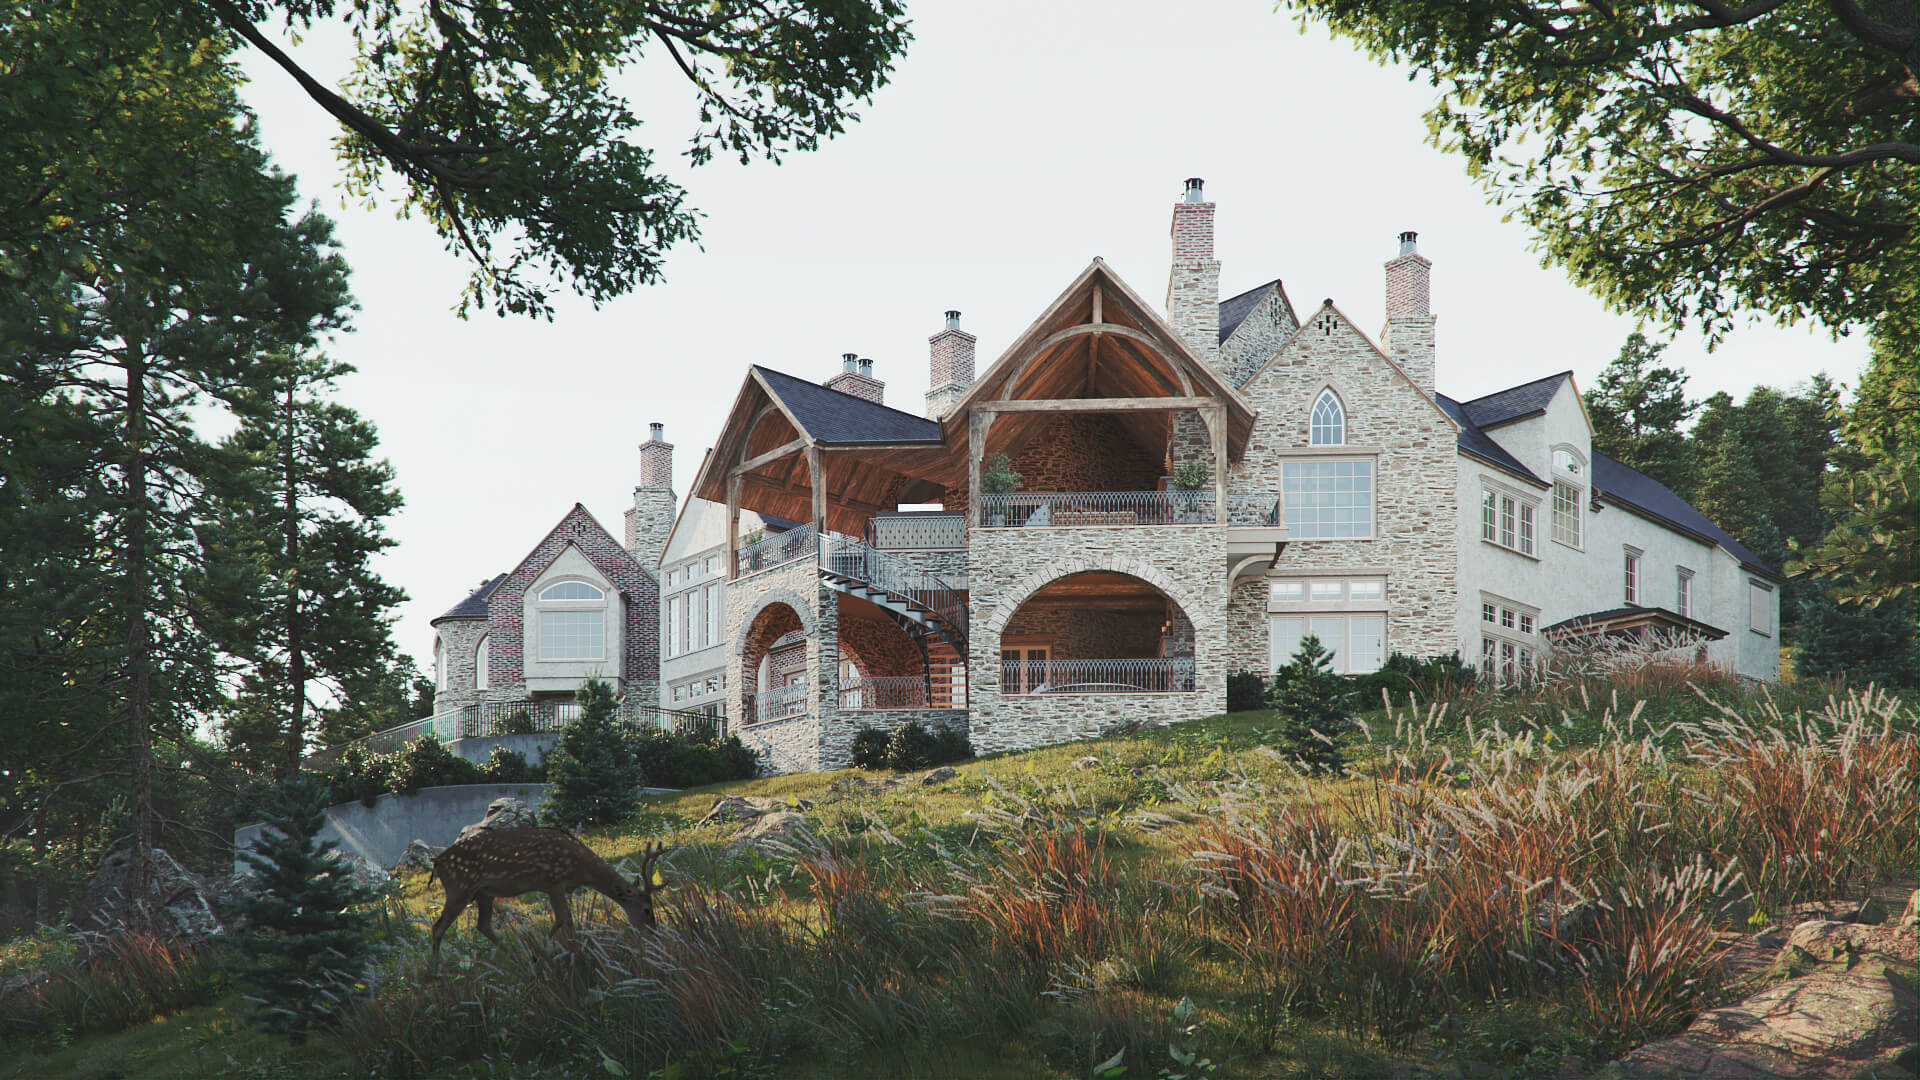 Rendering Services for a North Carolina Mansion Project